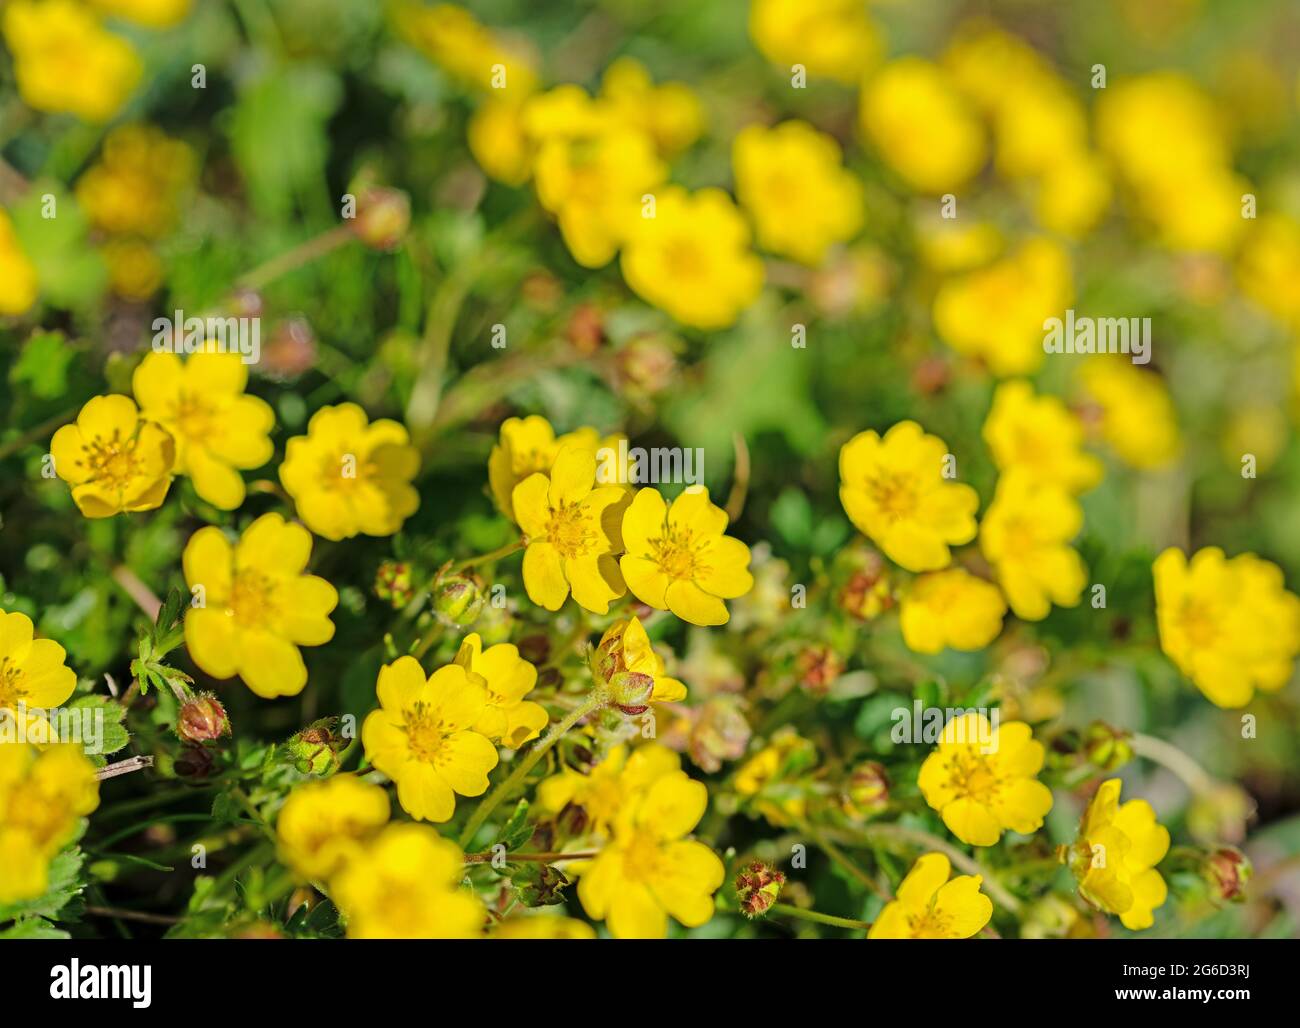 Flowers Of The Creeping Buttercup Ranunculus Repens Stock Photo Alamy